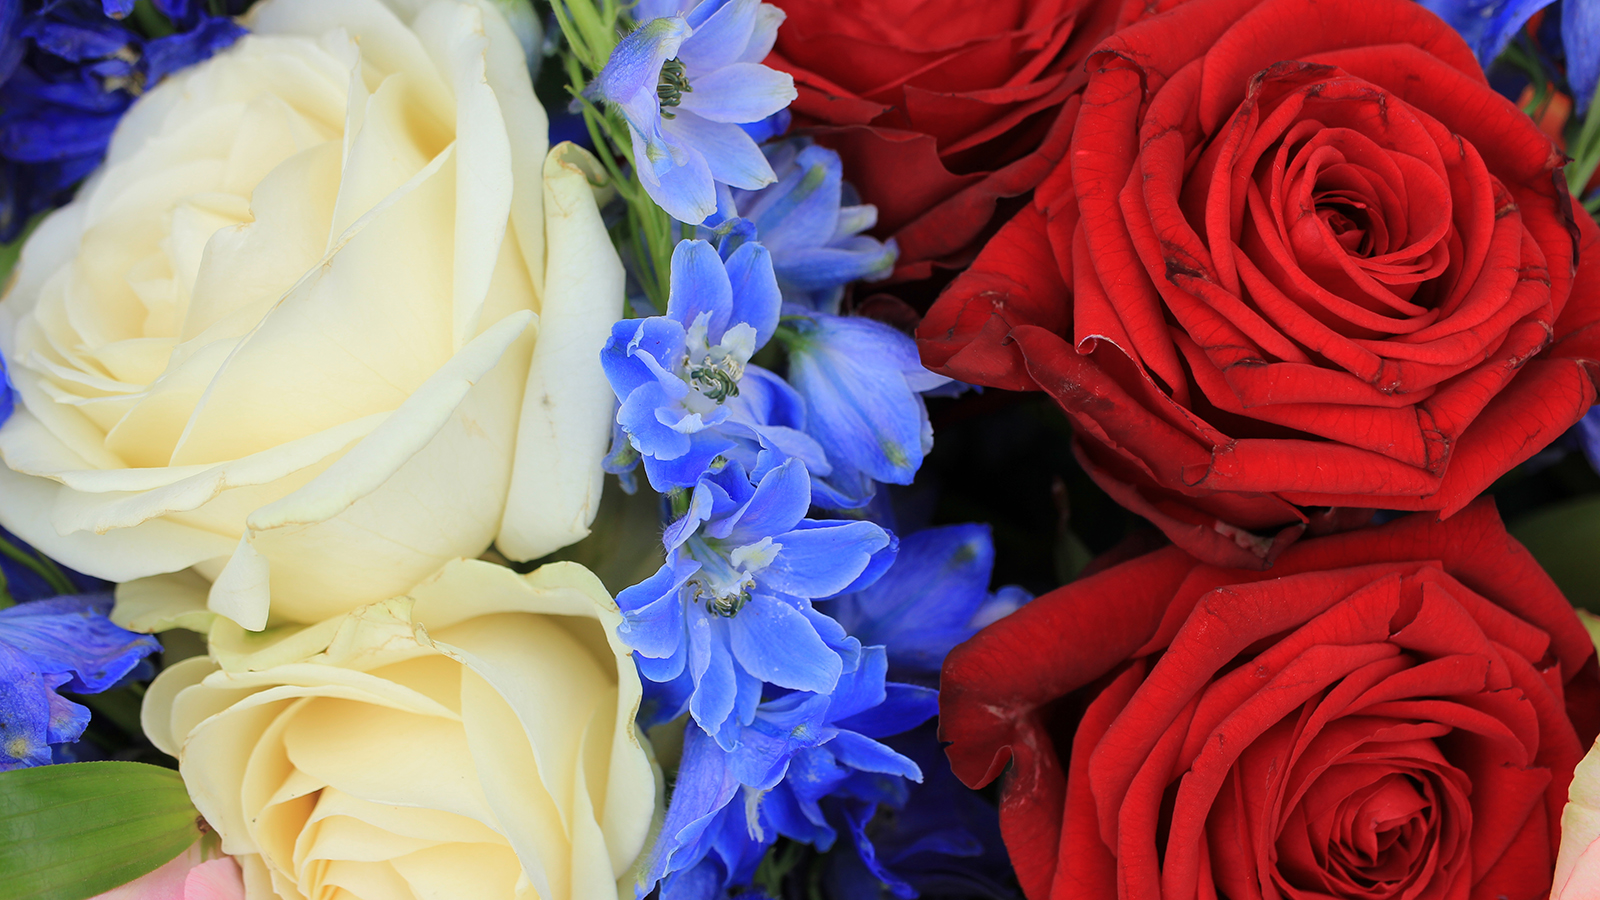 Red white and blue wedding flowers for a patriotic themed wedding